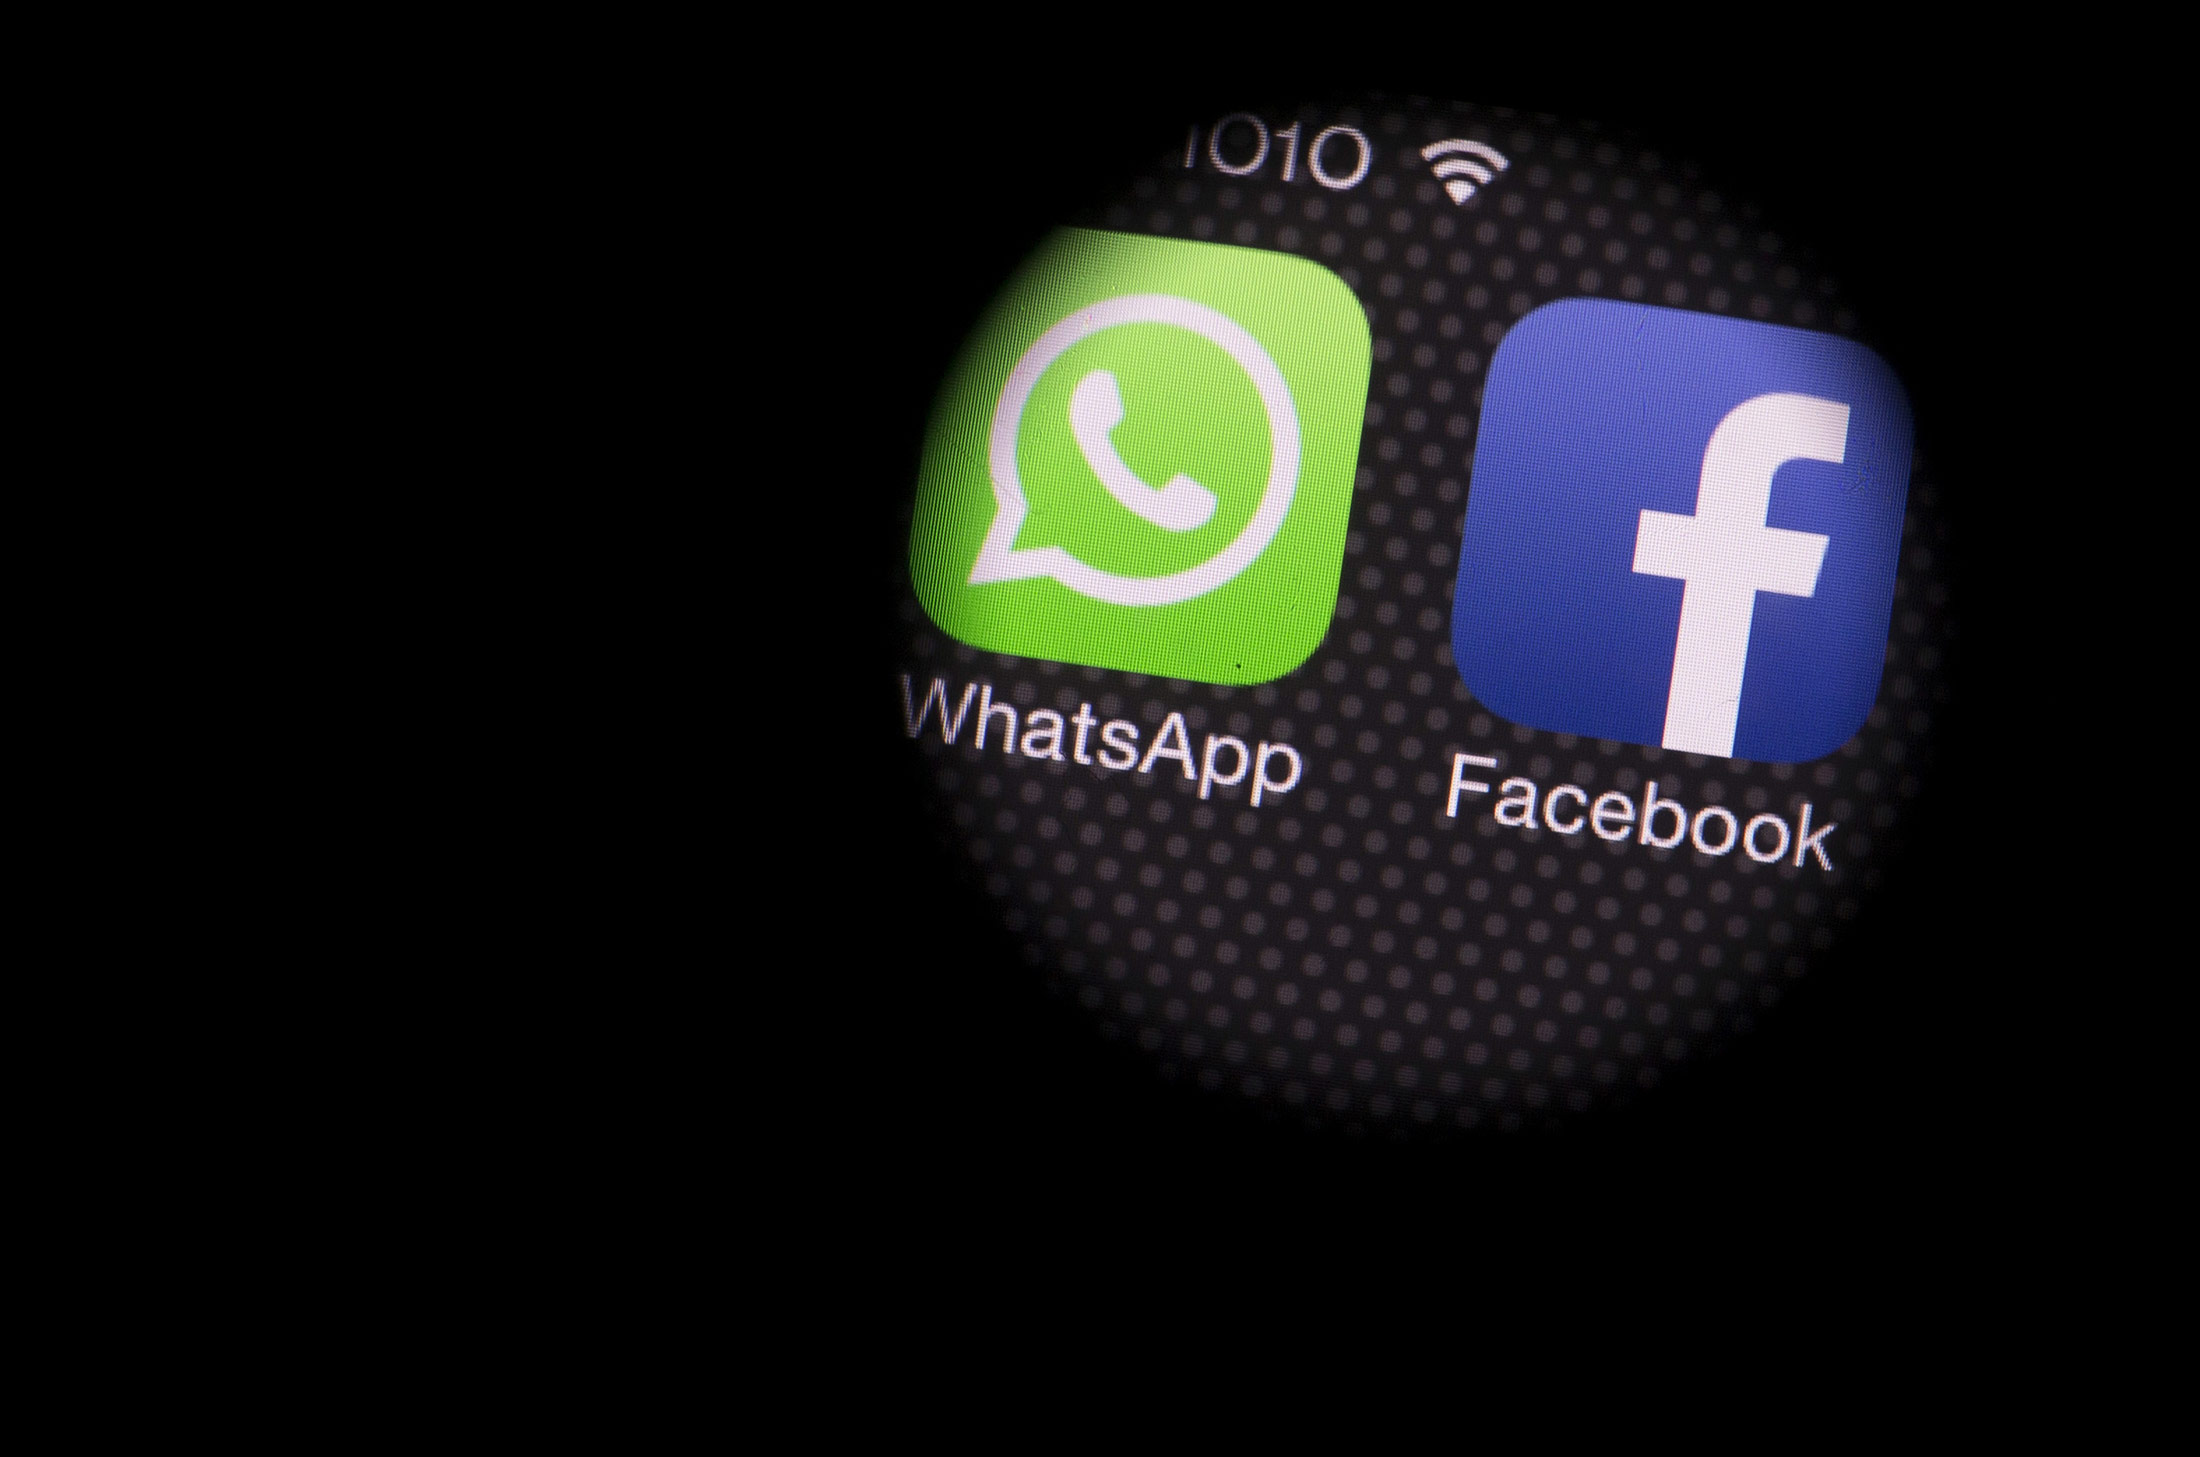 Facebook Plans for WhatsApp Stumble on EU Privacy Concerns - Bloomberg